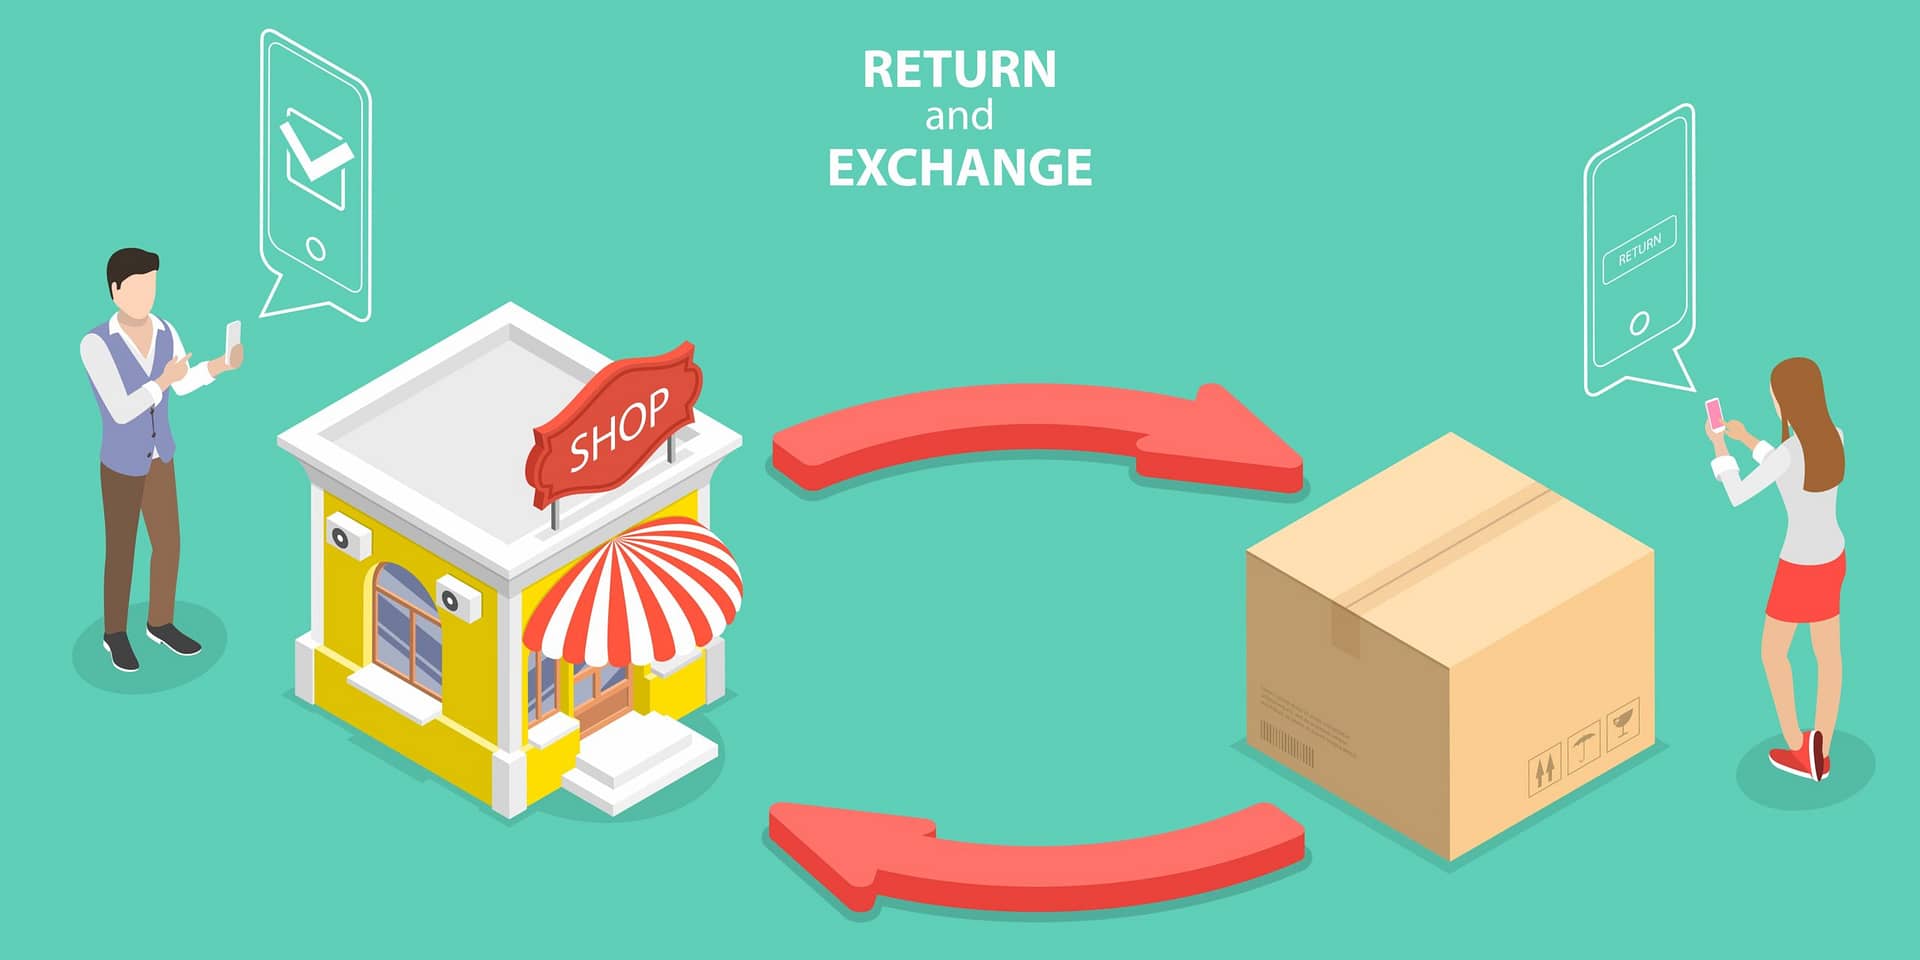 Optimizing Returns and Exchanges